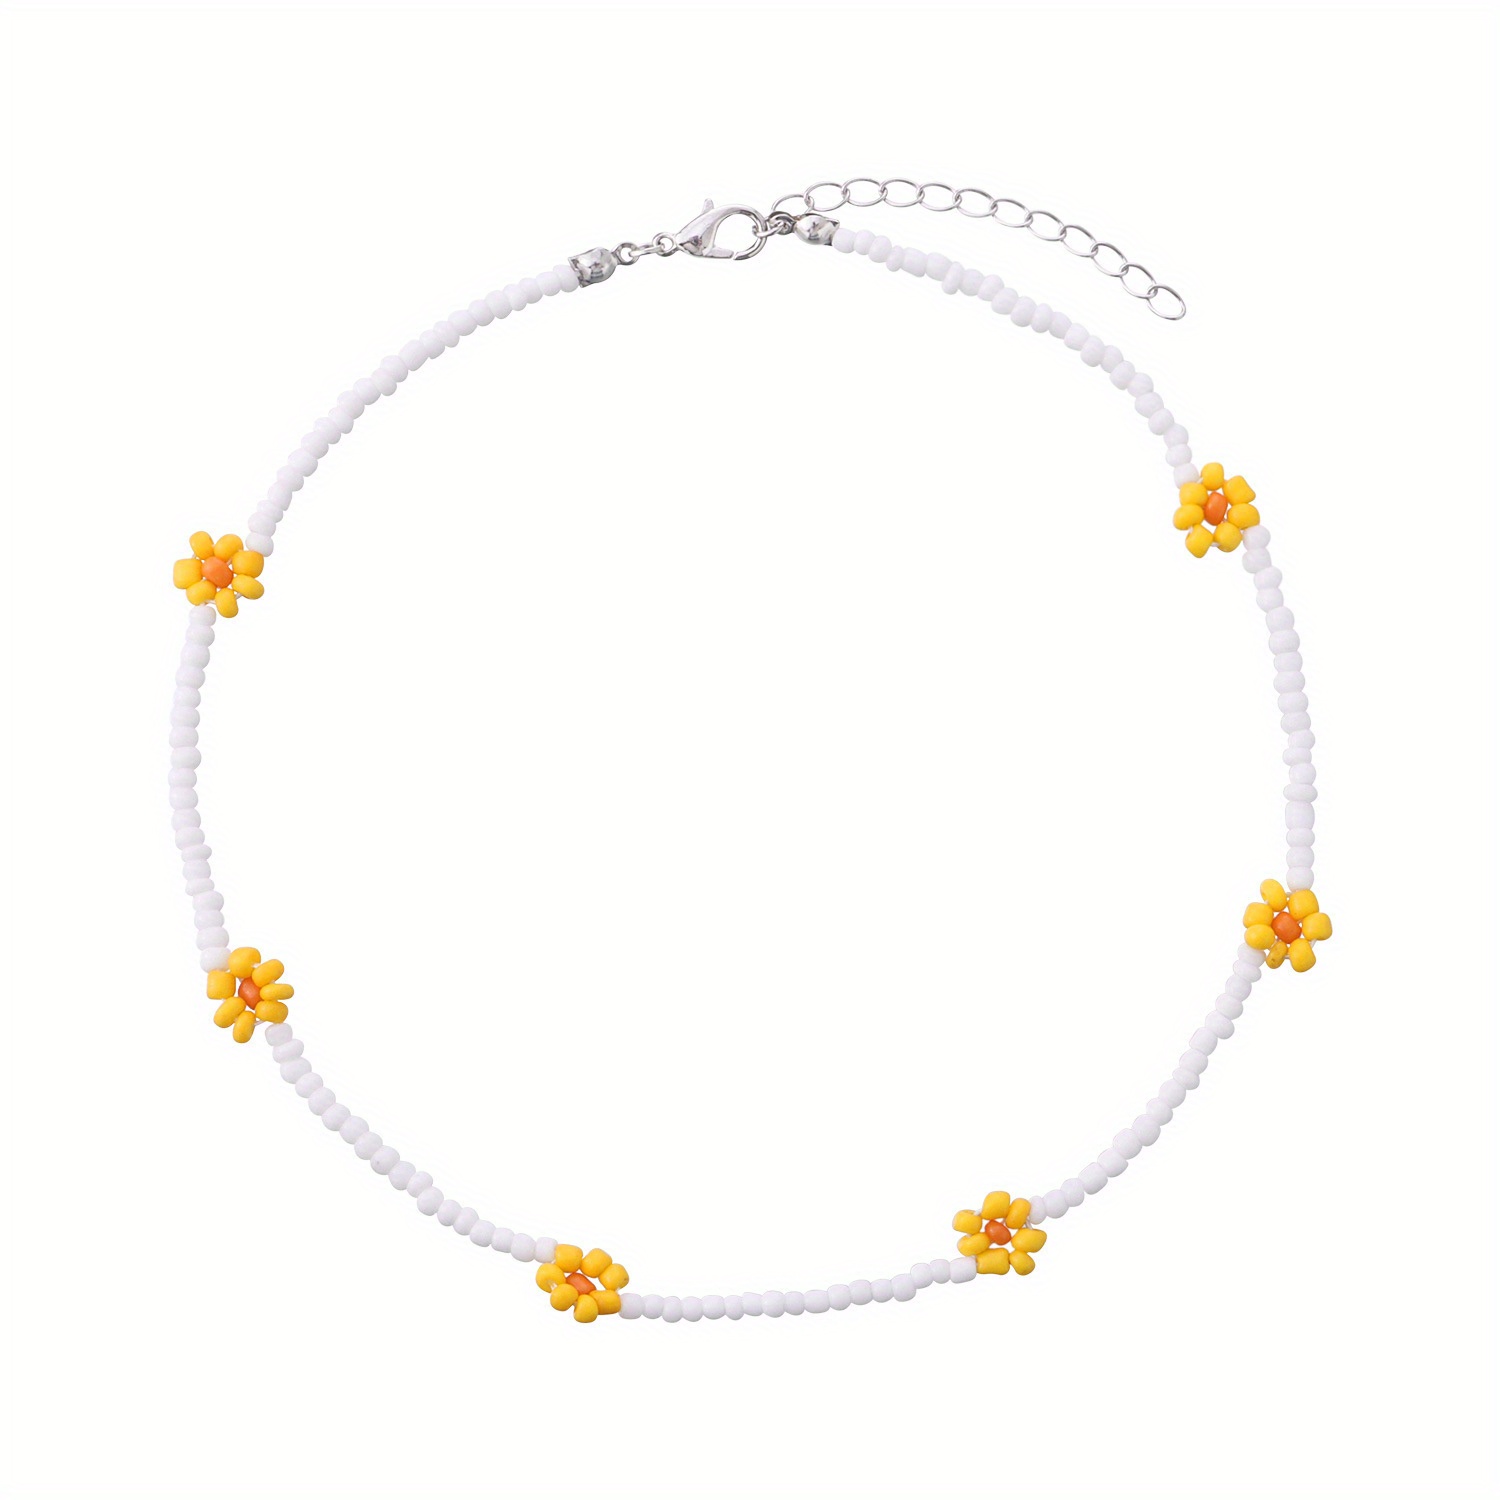 Handmade Daisy Chain Beaded Necklace,flower Beads, Seed Bead Necklace 